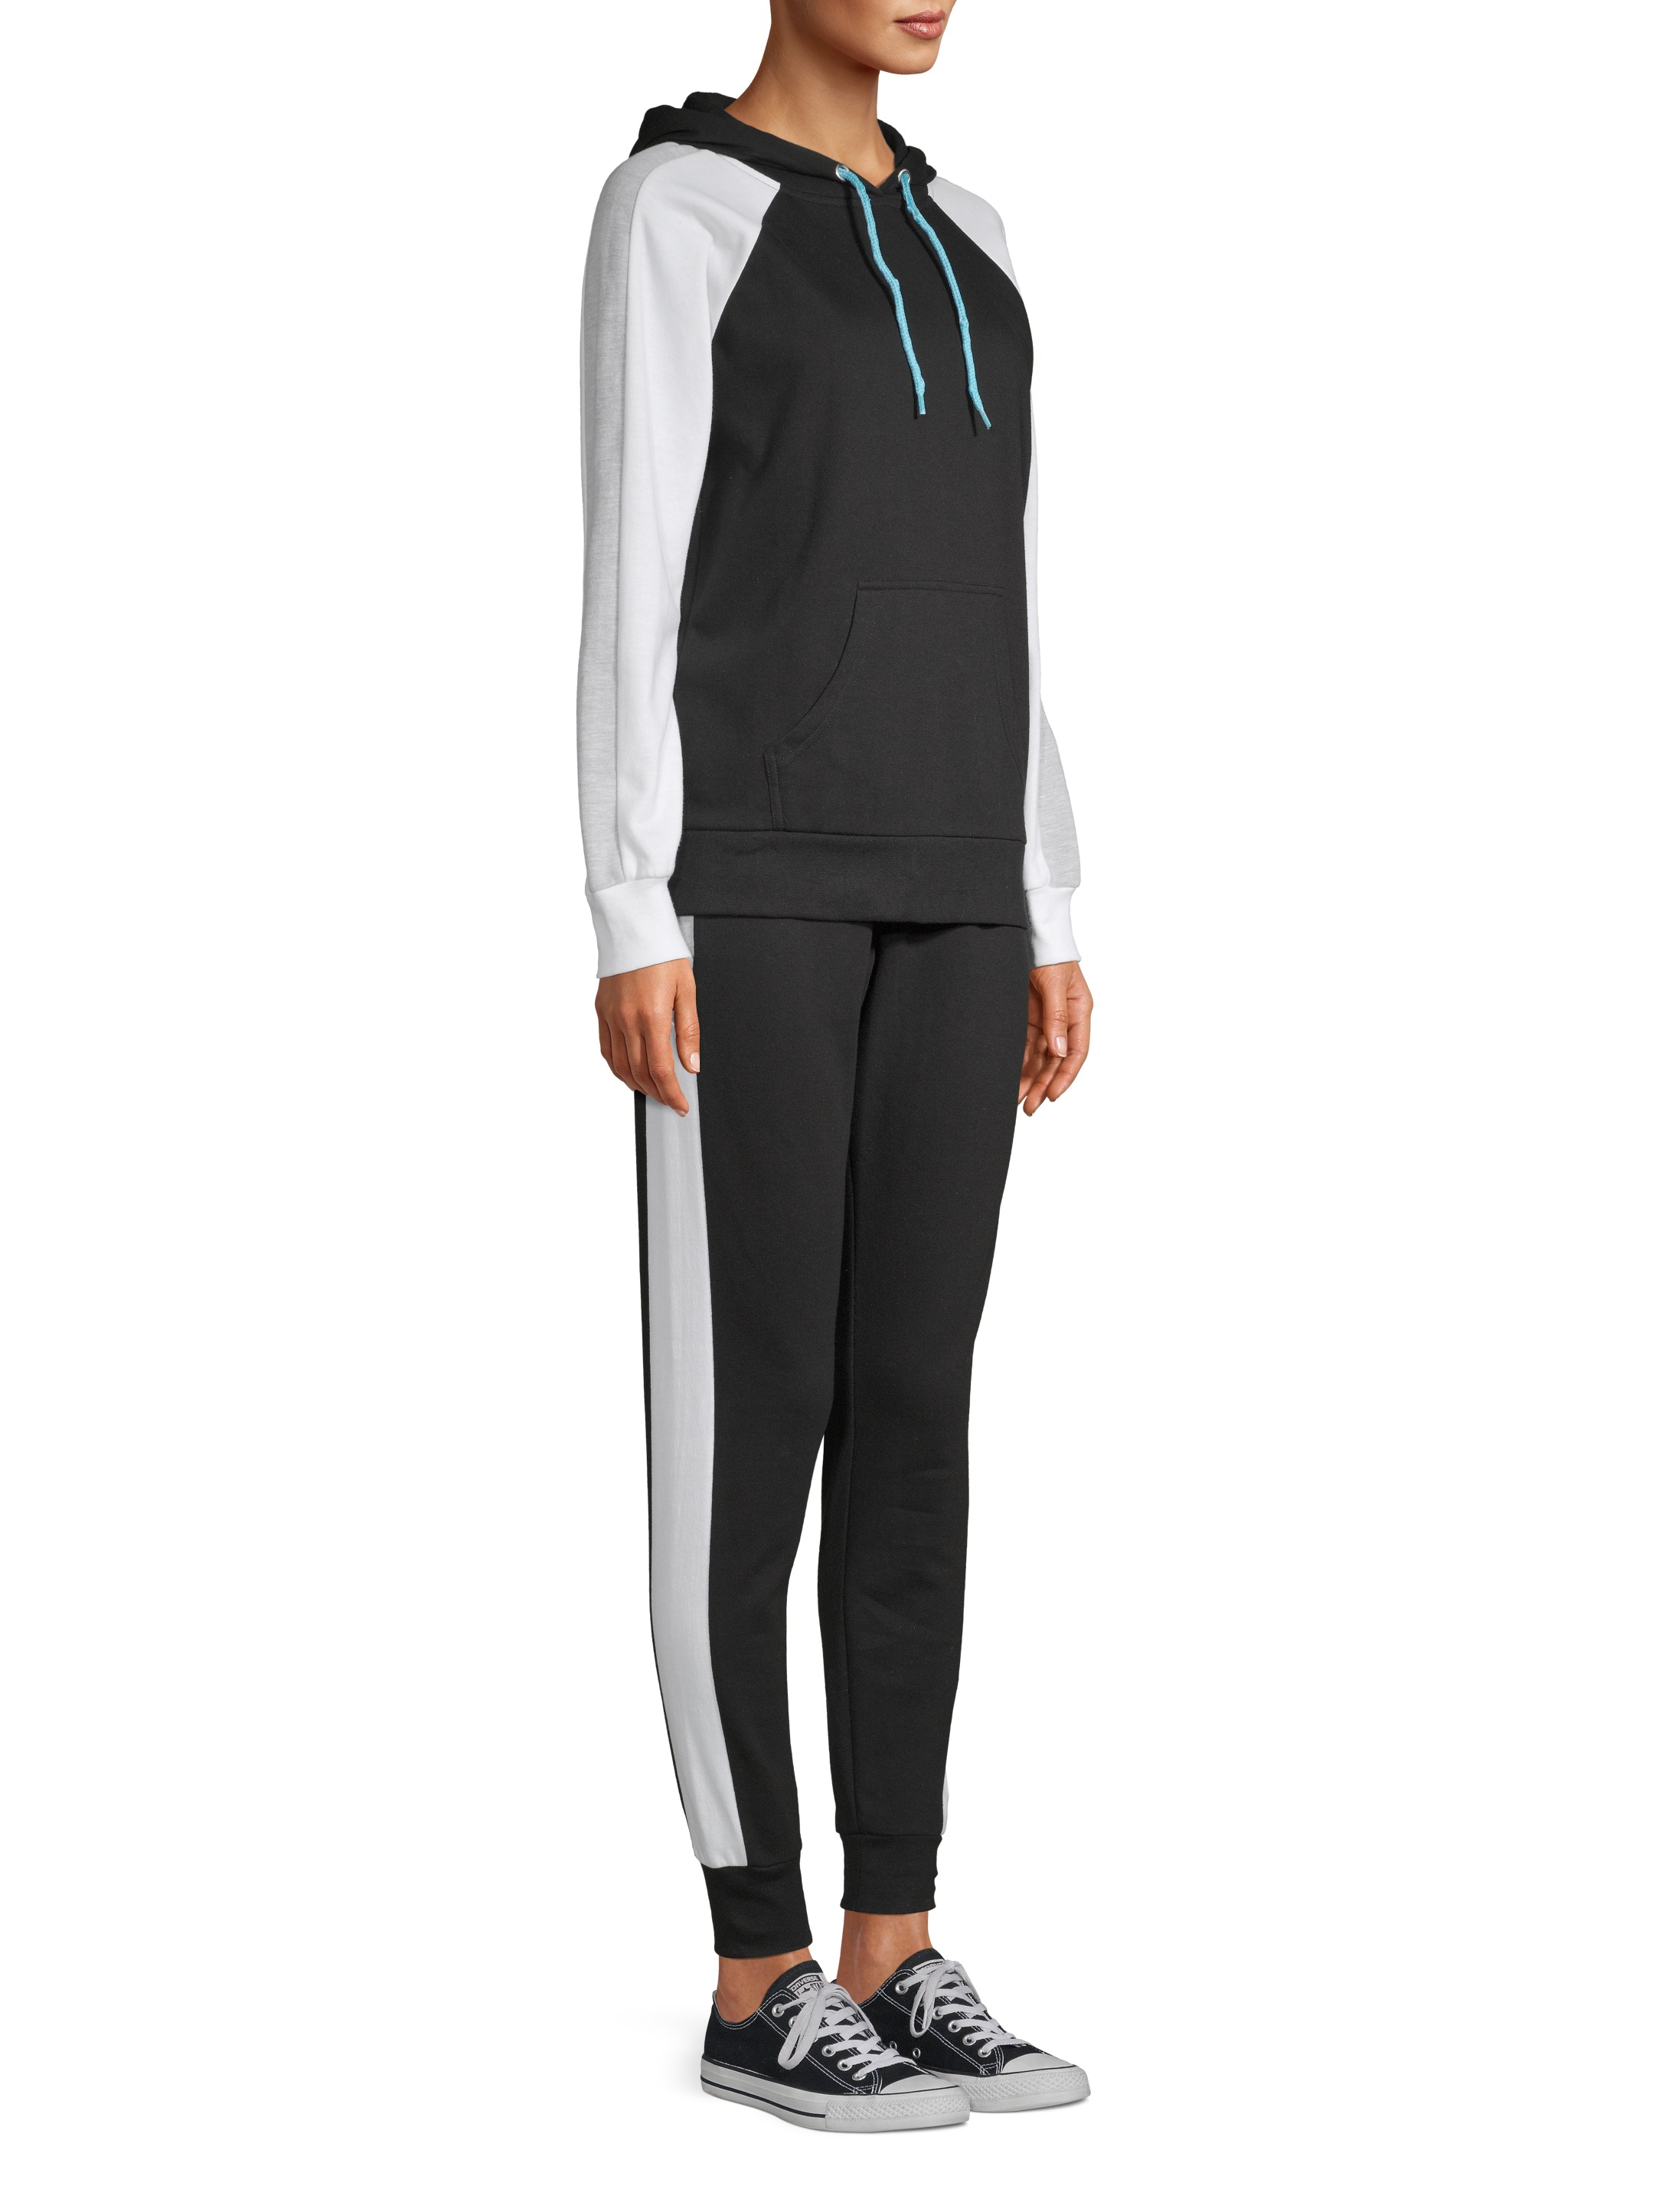 Feathers Women's Athleisure Fleece Hoodie and Jogger Set - image 3 of 5